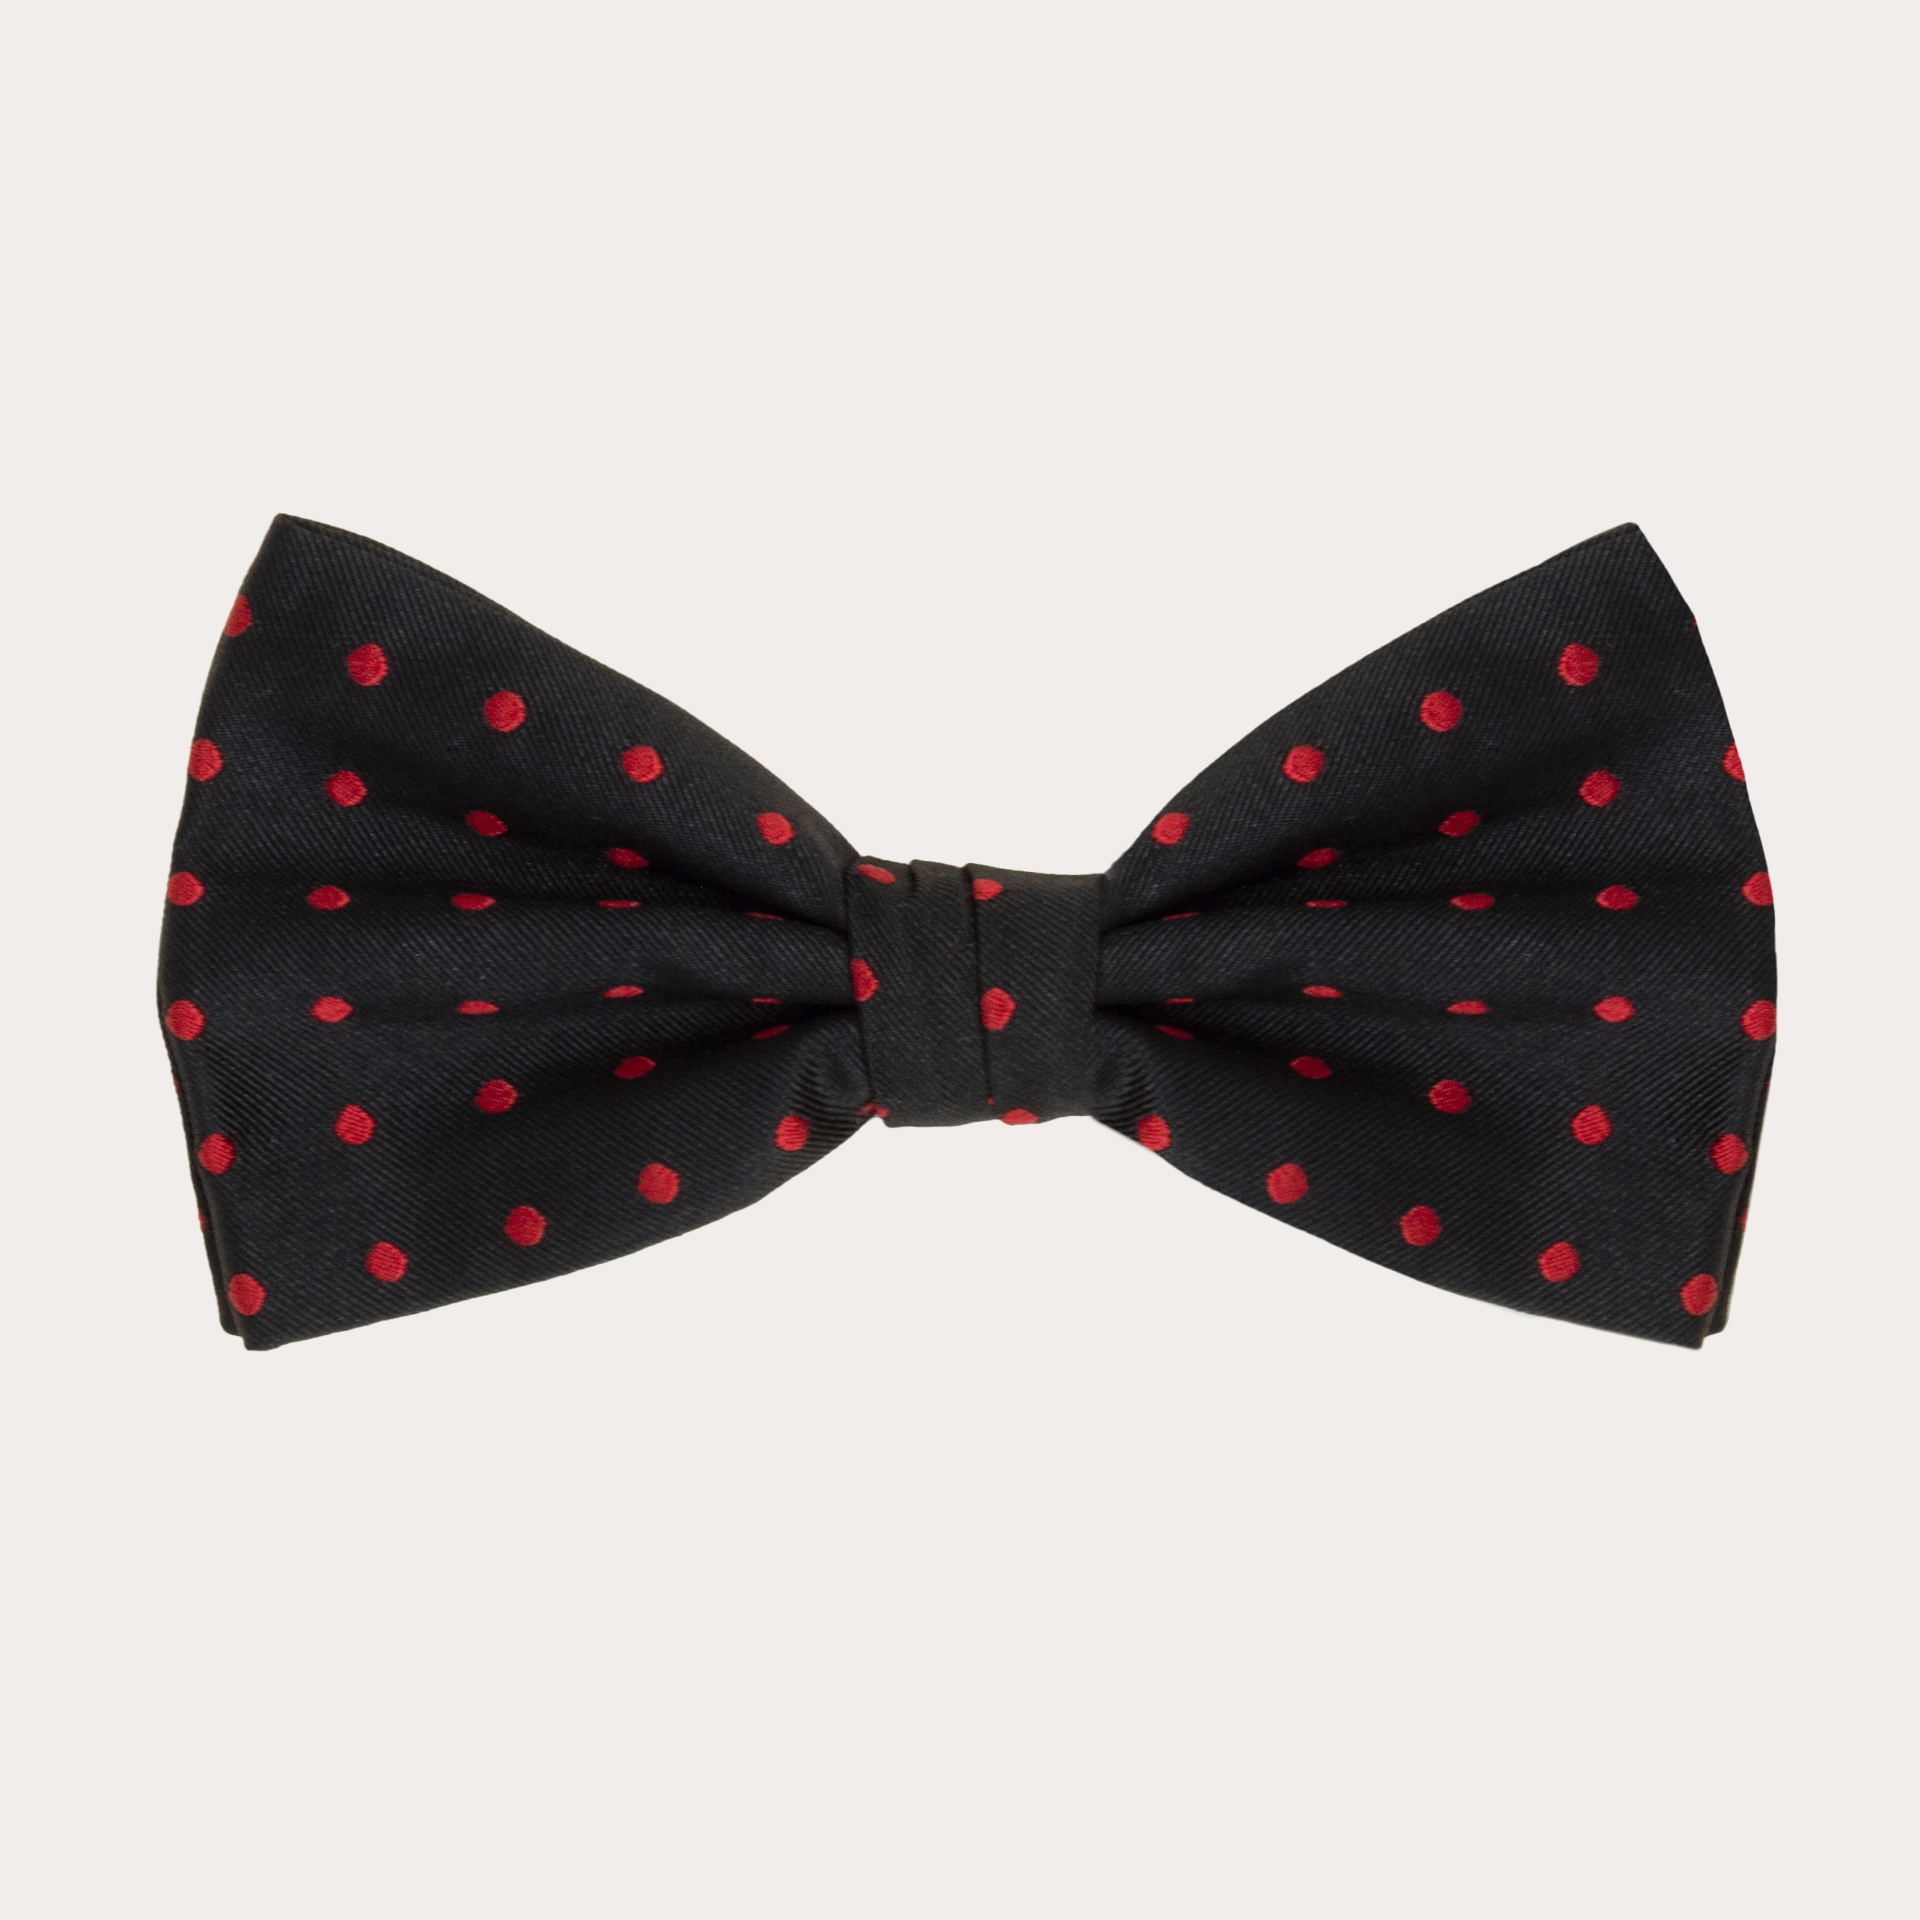 BRUCLE Silk Pre-tied Bow tie, black red dot